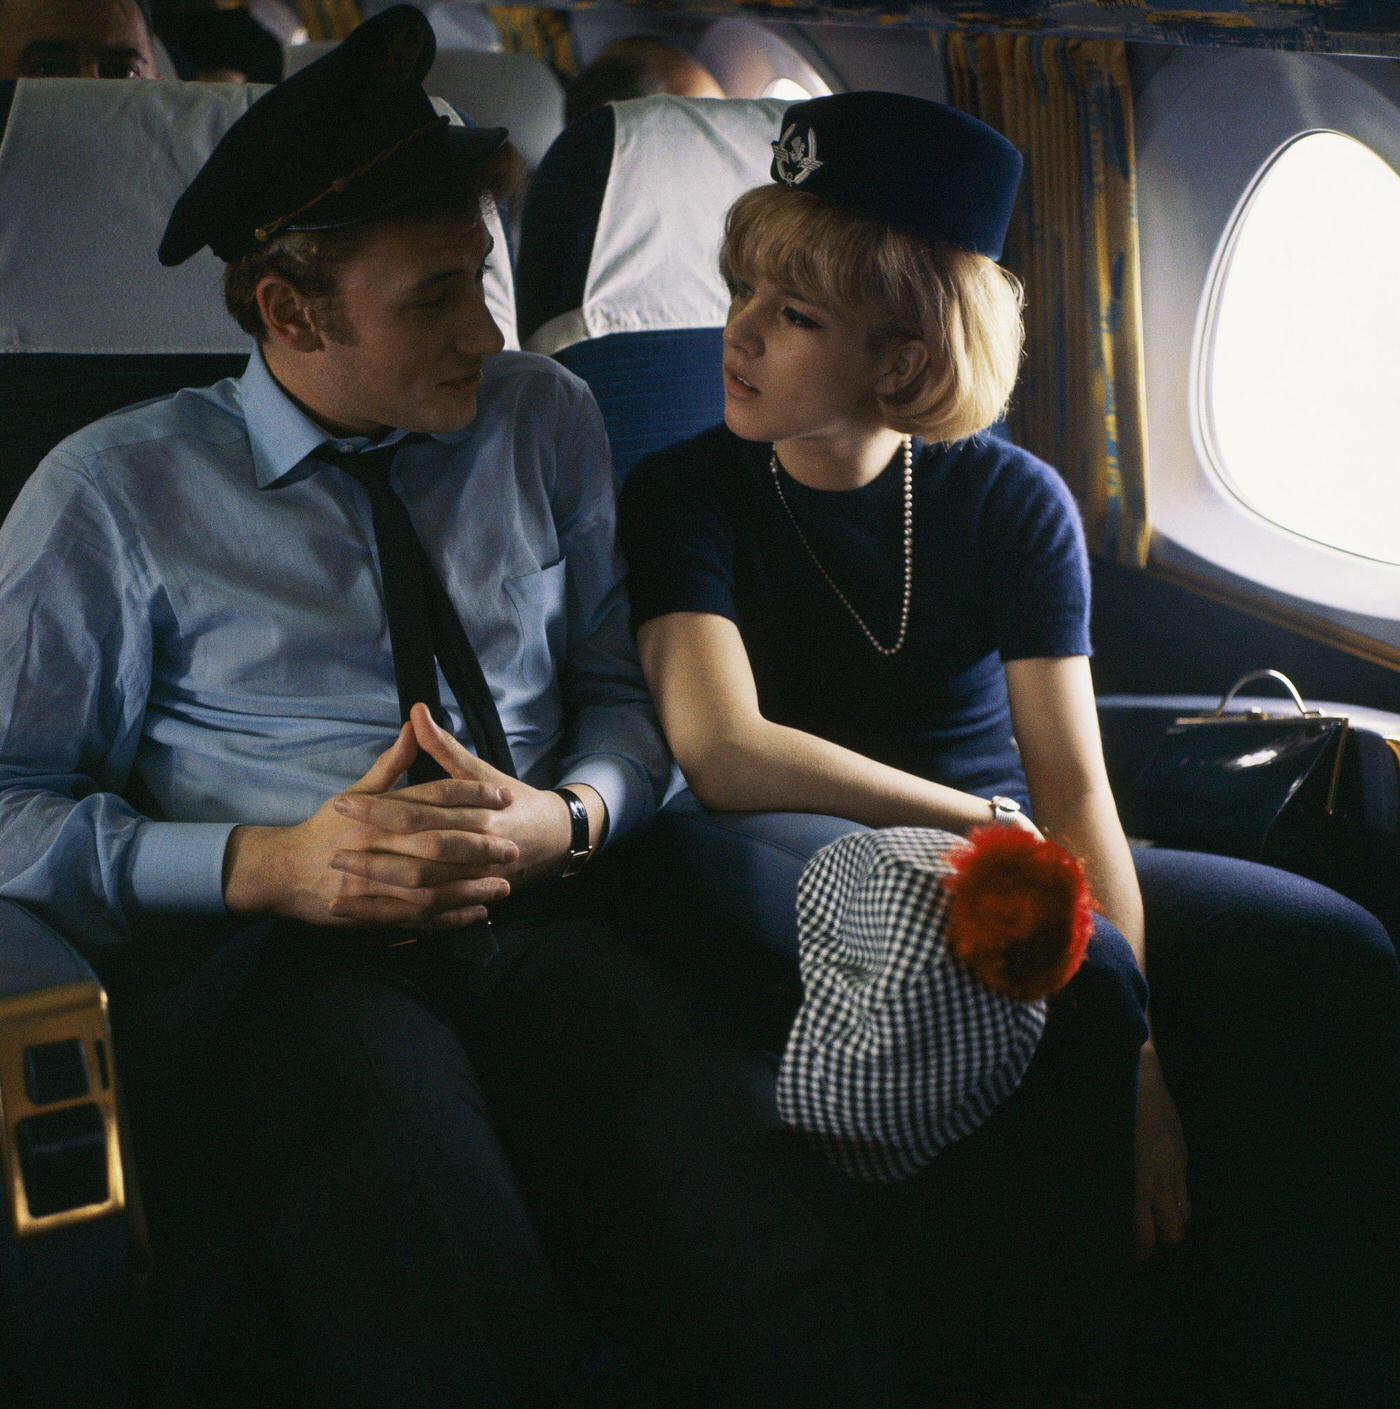 Sylvie Vartan and Johnny Hallyday in an airplane in 1963, with Vartan wearing a flight attendant's hat and Hallyday wearing a pilot's cap.